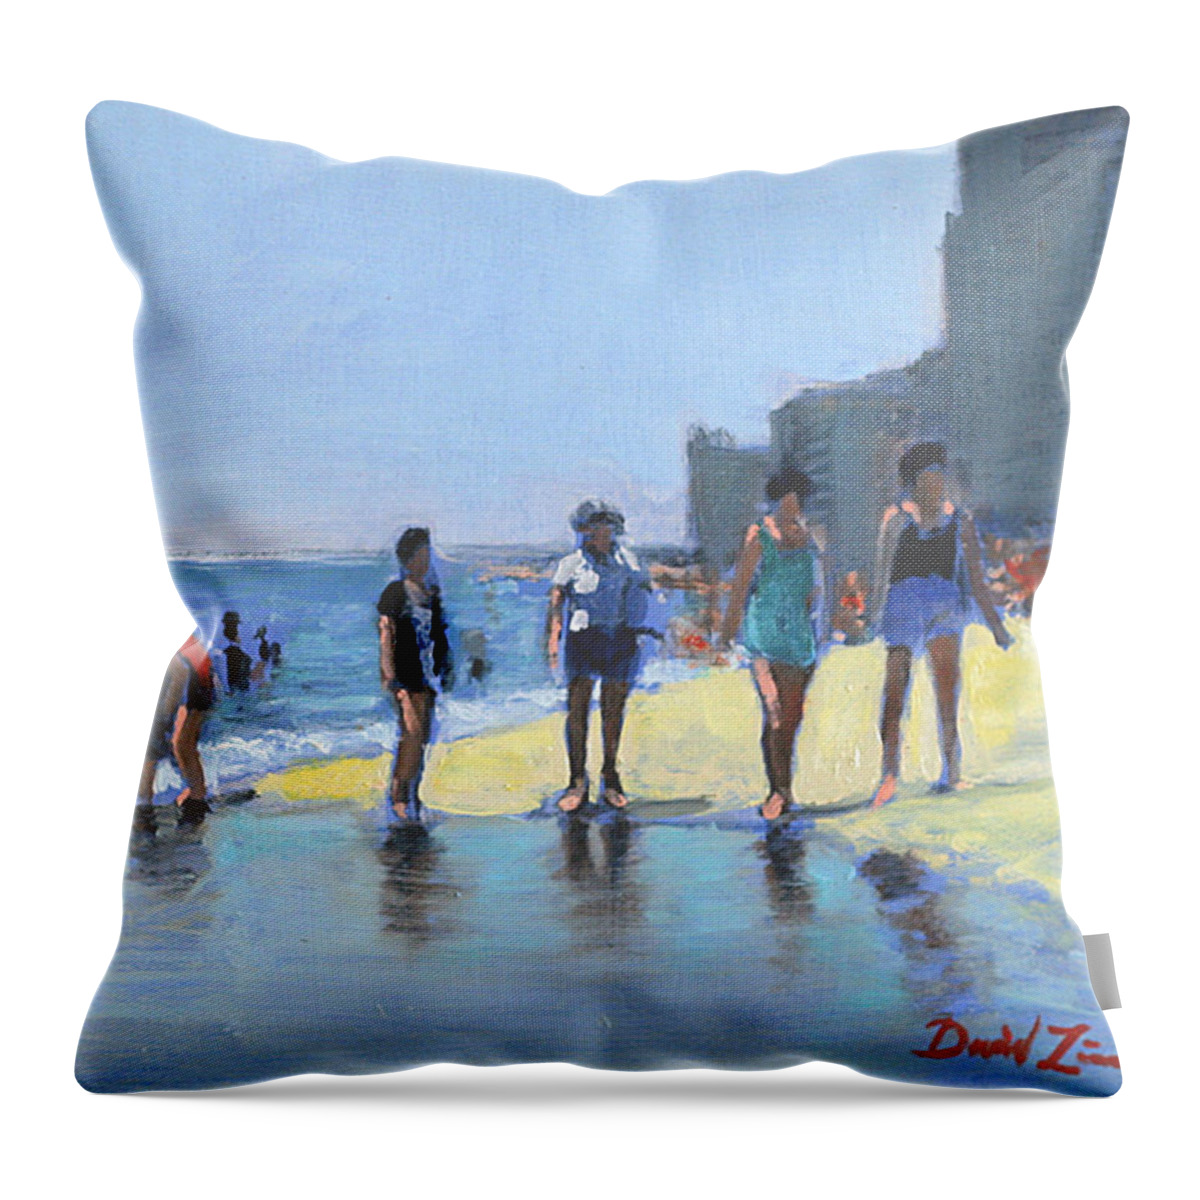 Beach Paintings Throw Pillow featuring the painting Downslope by David Zimmerman